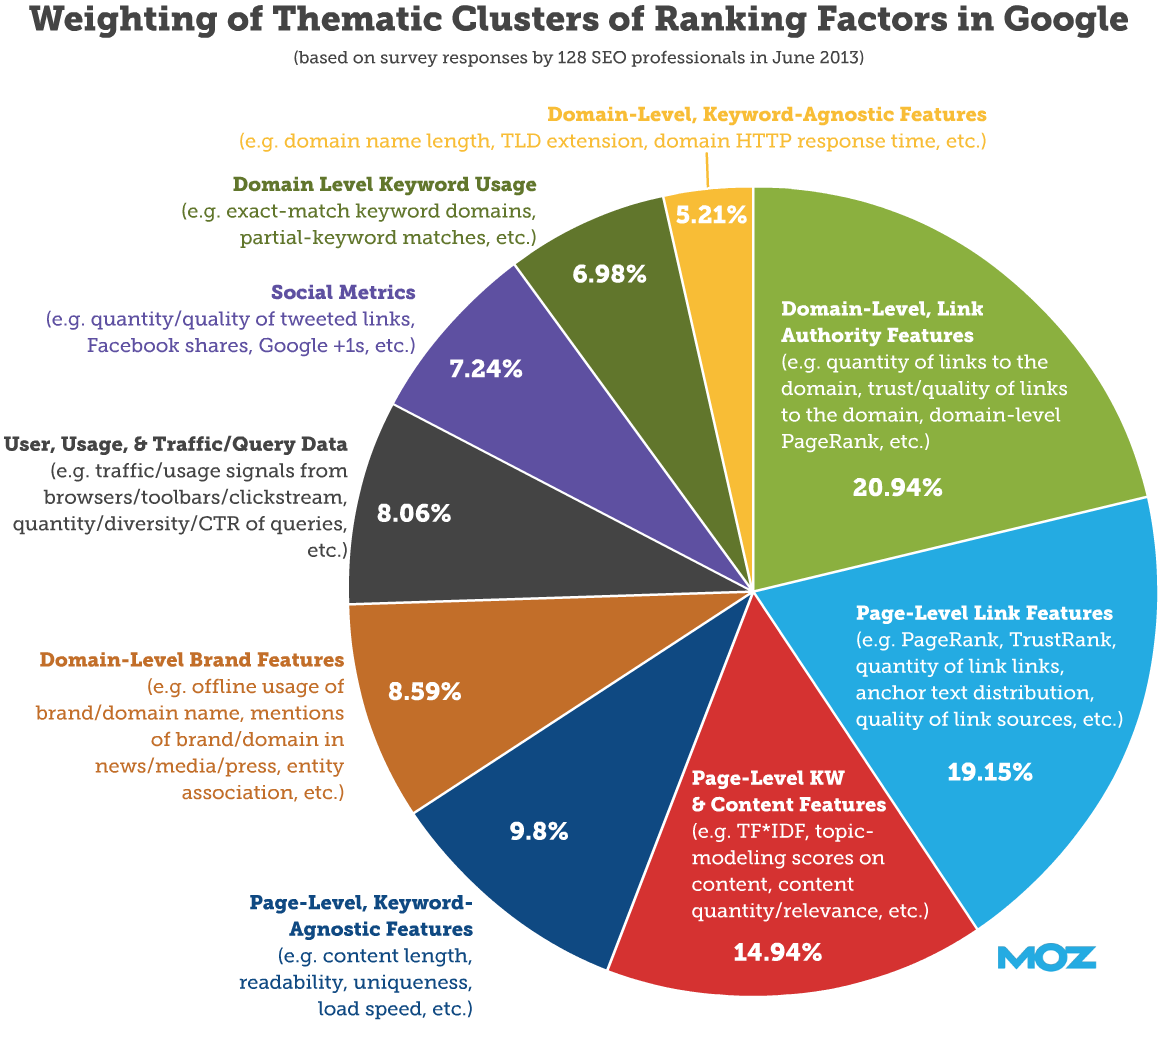 weighting of thematic clusters of ranking factors in google